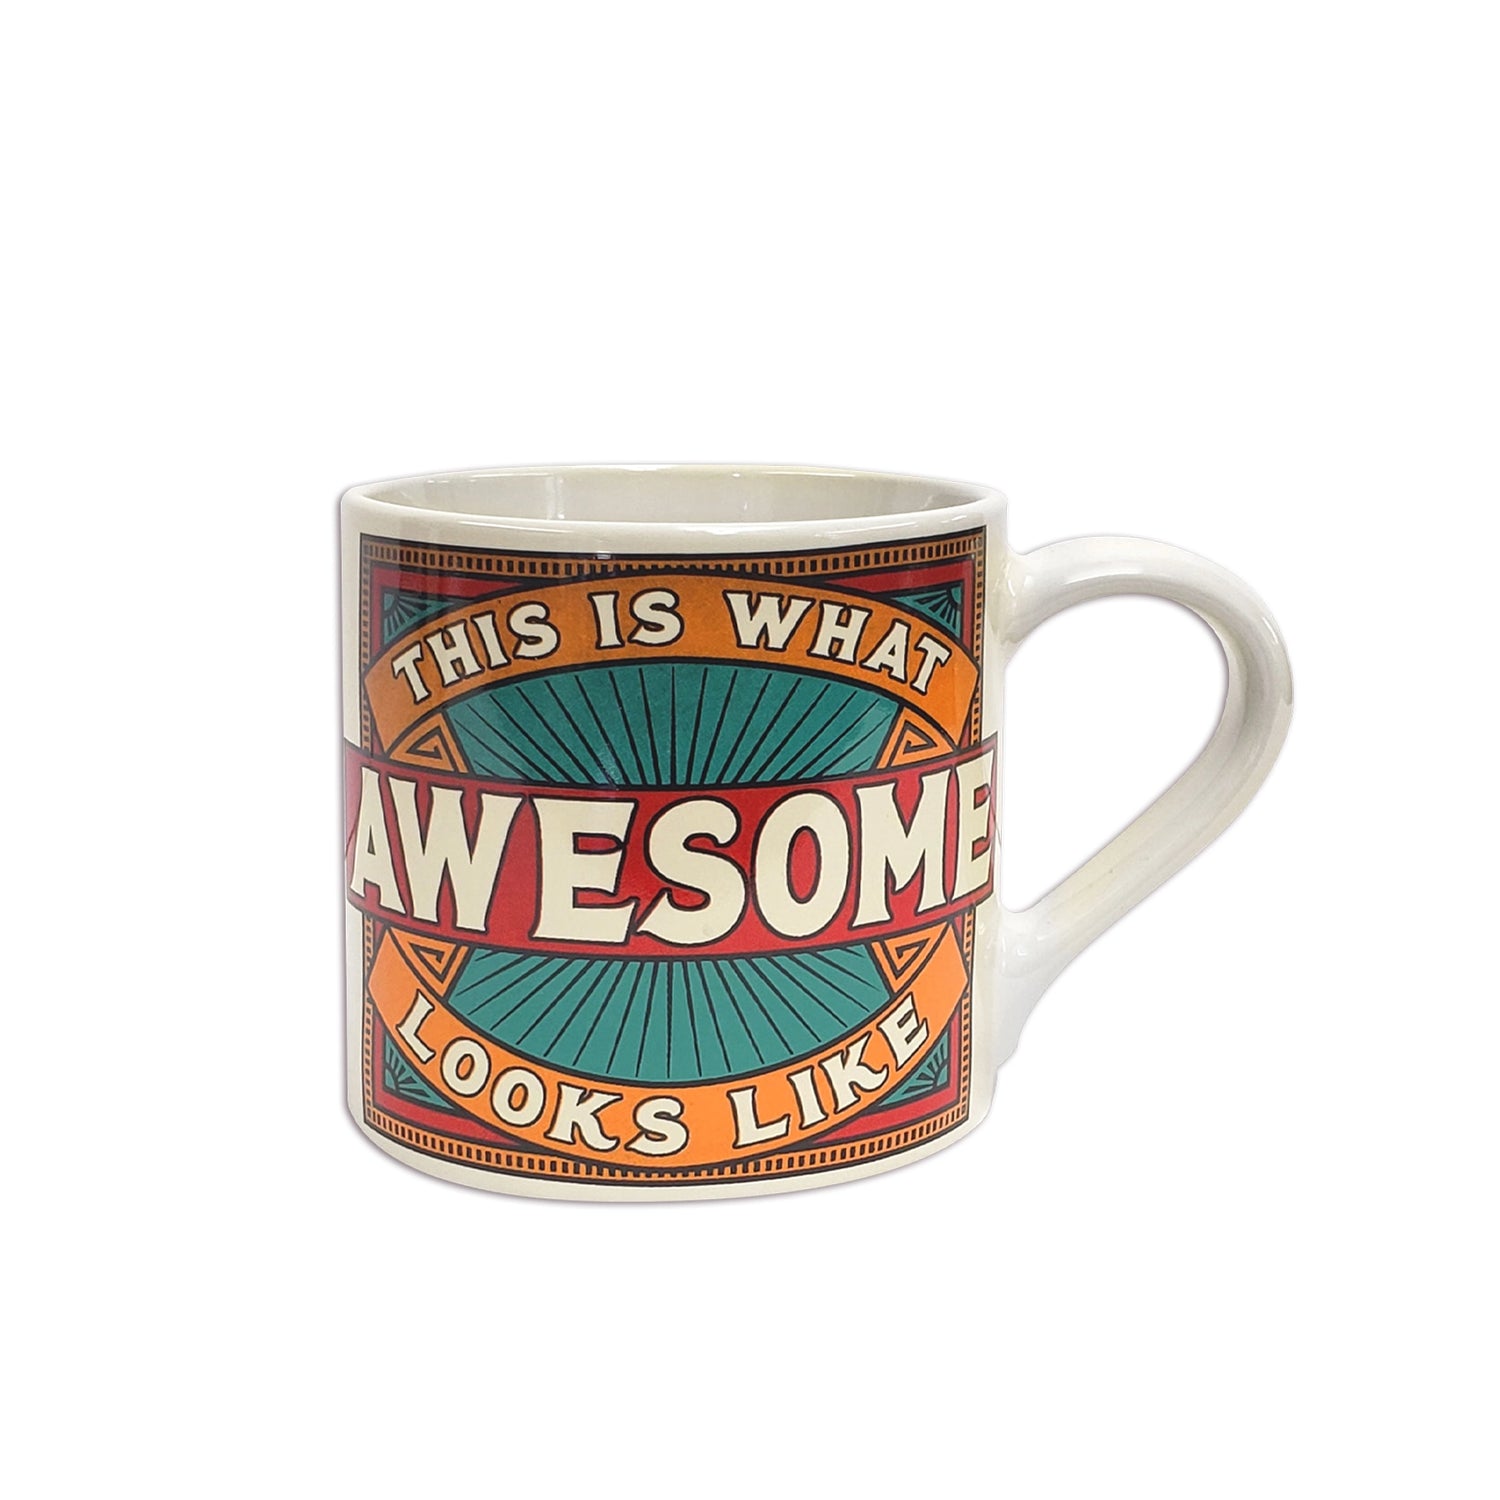 ceramic tea or coffee mug. cafe cup reads "This is What AWESOME Looks Like" in red, orange and teal. retro vintage style